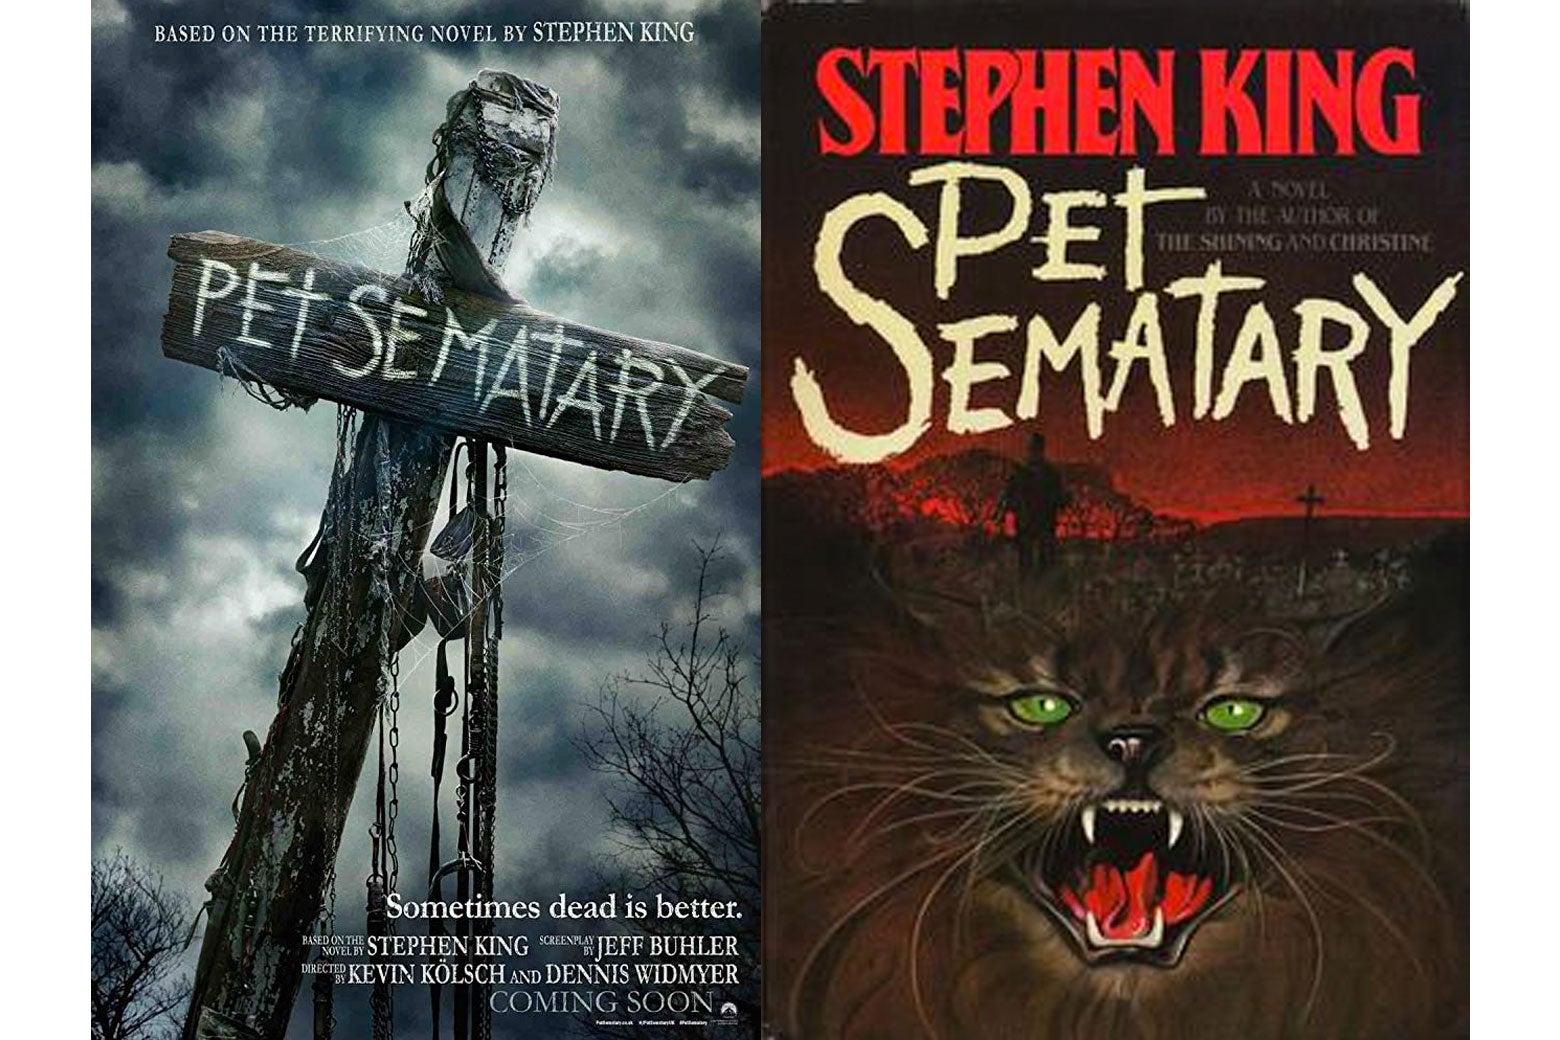 The Pet Sematary movie poster and book cover.